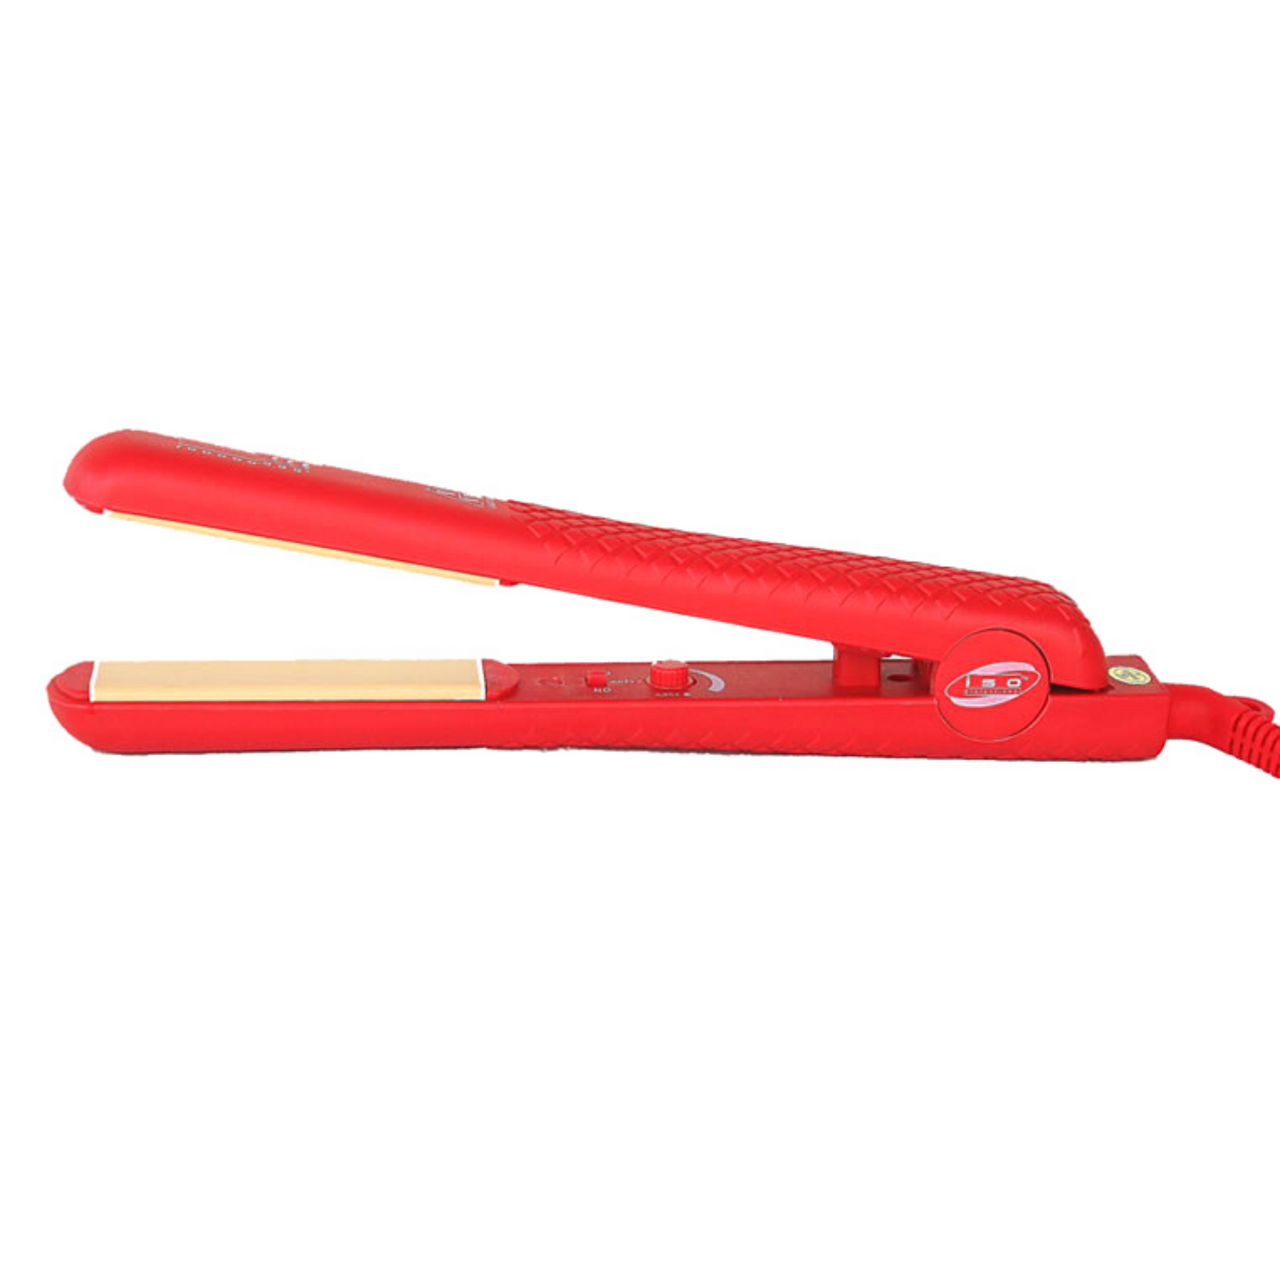 Red Vintage 1.25" Yellow Floating Ceramic Flat Iron Straightener with Adjustable Temperature